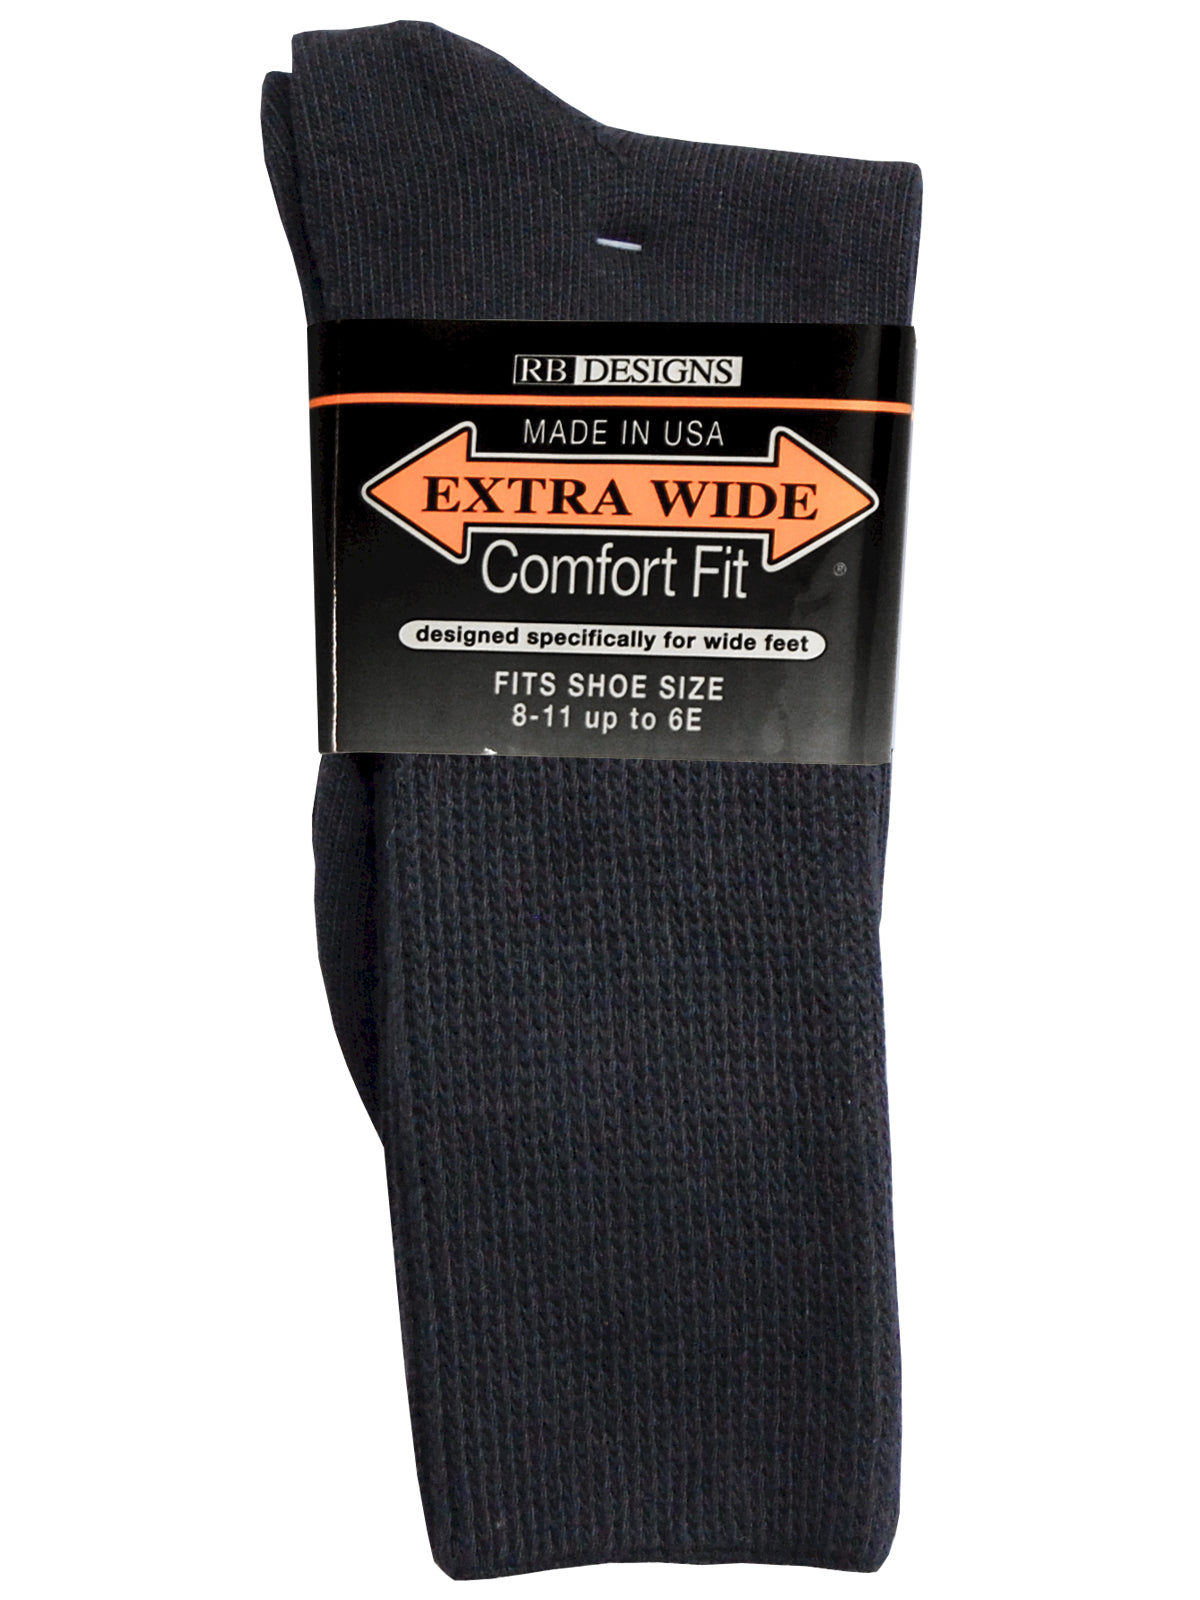 Extra Wide Men's Comfort Fit Athletic Crew Socks in Black - Size Small (5 - 8)